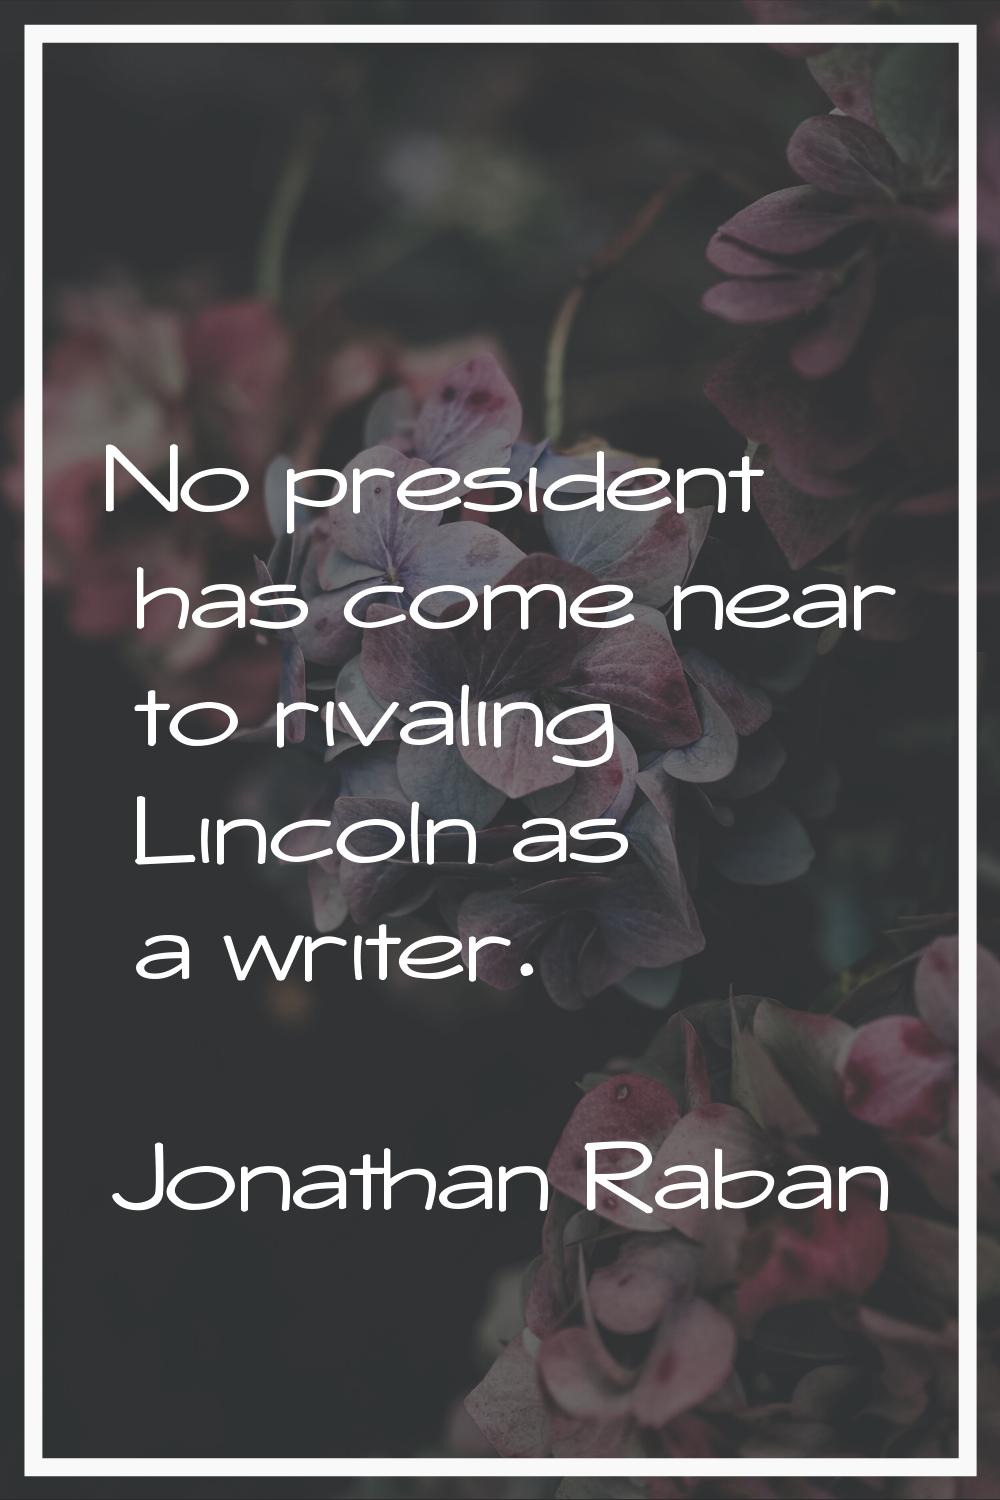 No president has come near to rivaling Lincoln as a writer.